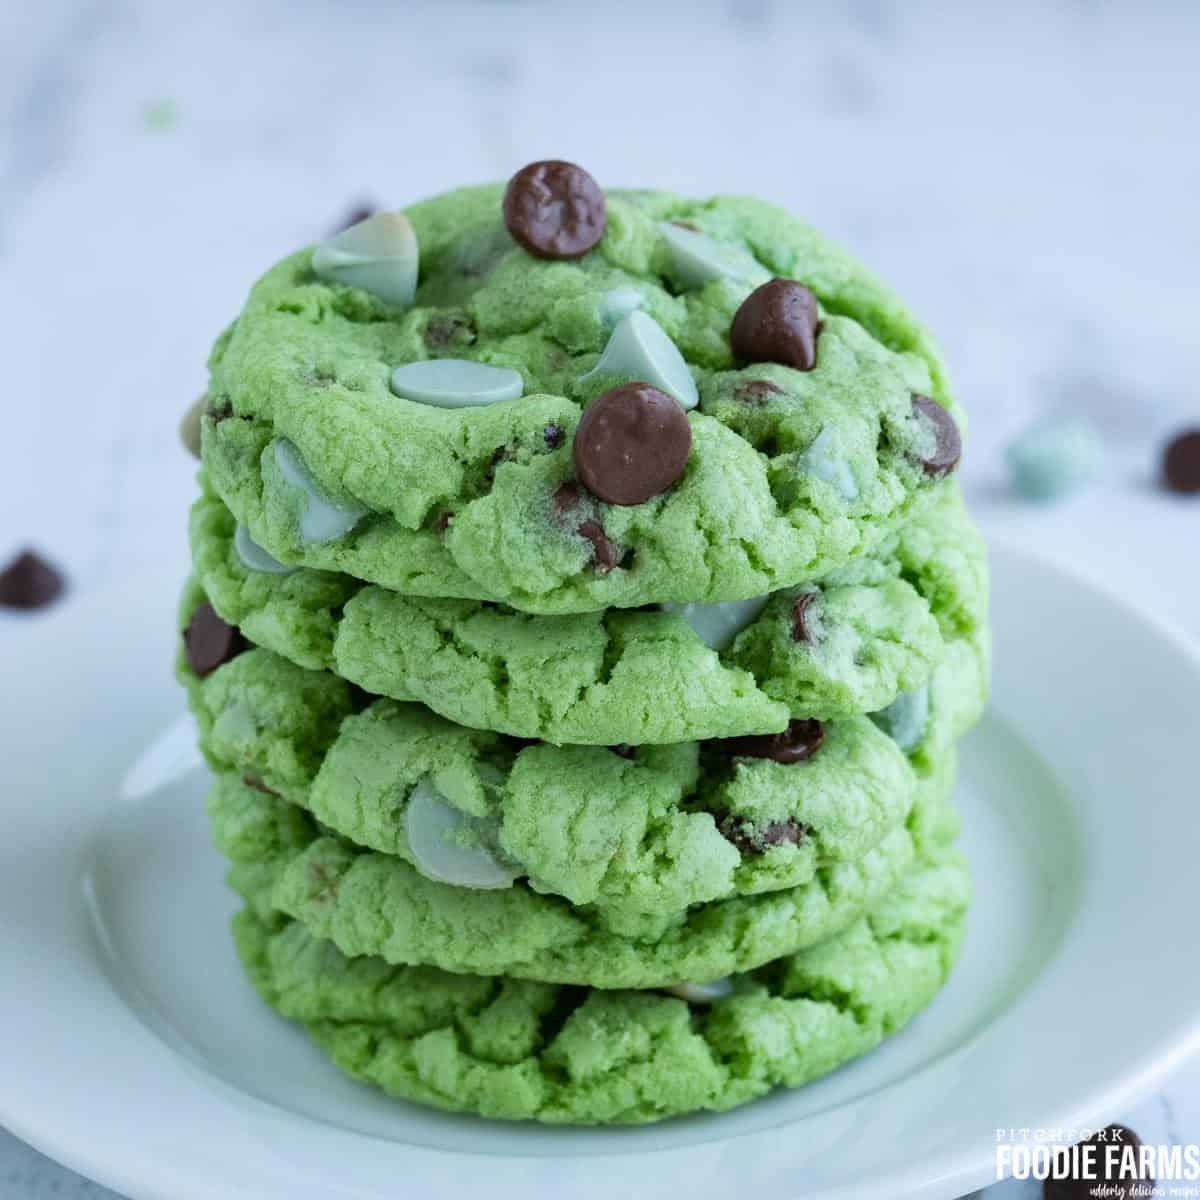 Mint Chocolate Chip Cookies - Pitchfork Foodie Farms